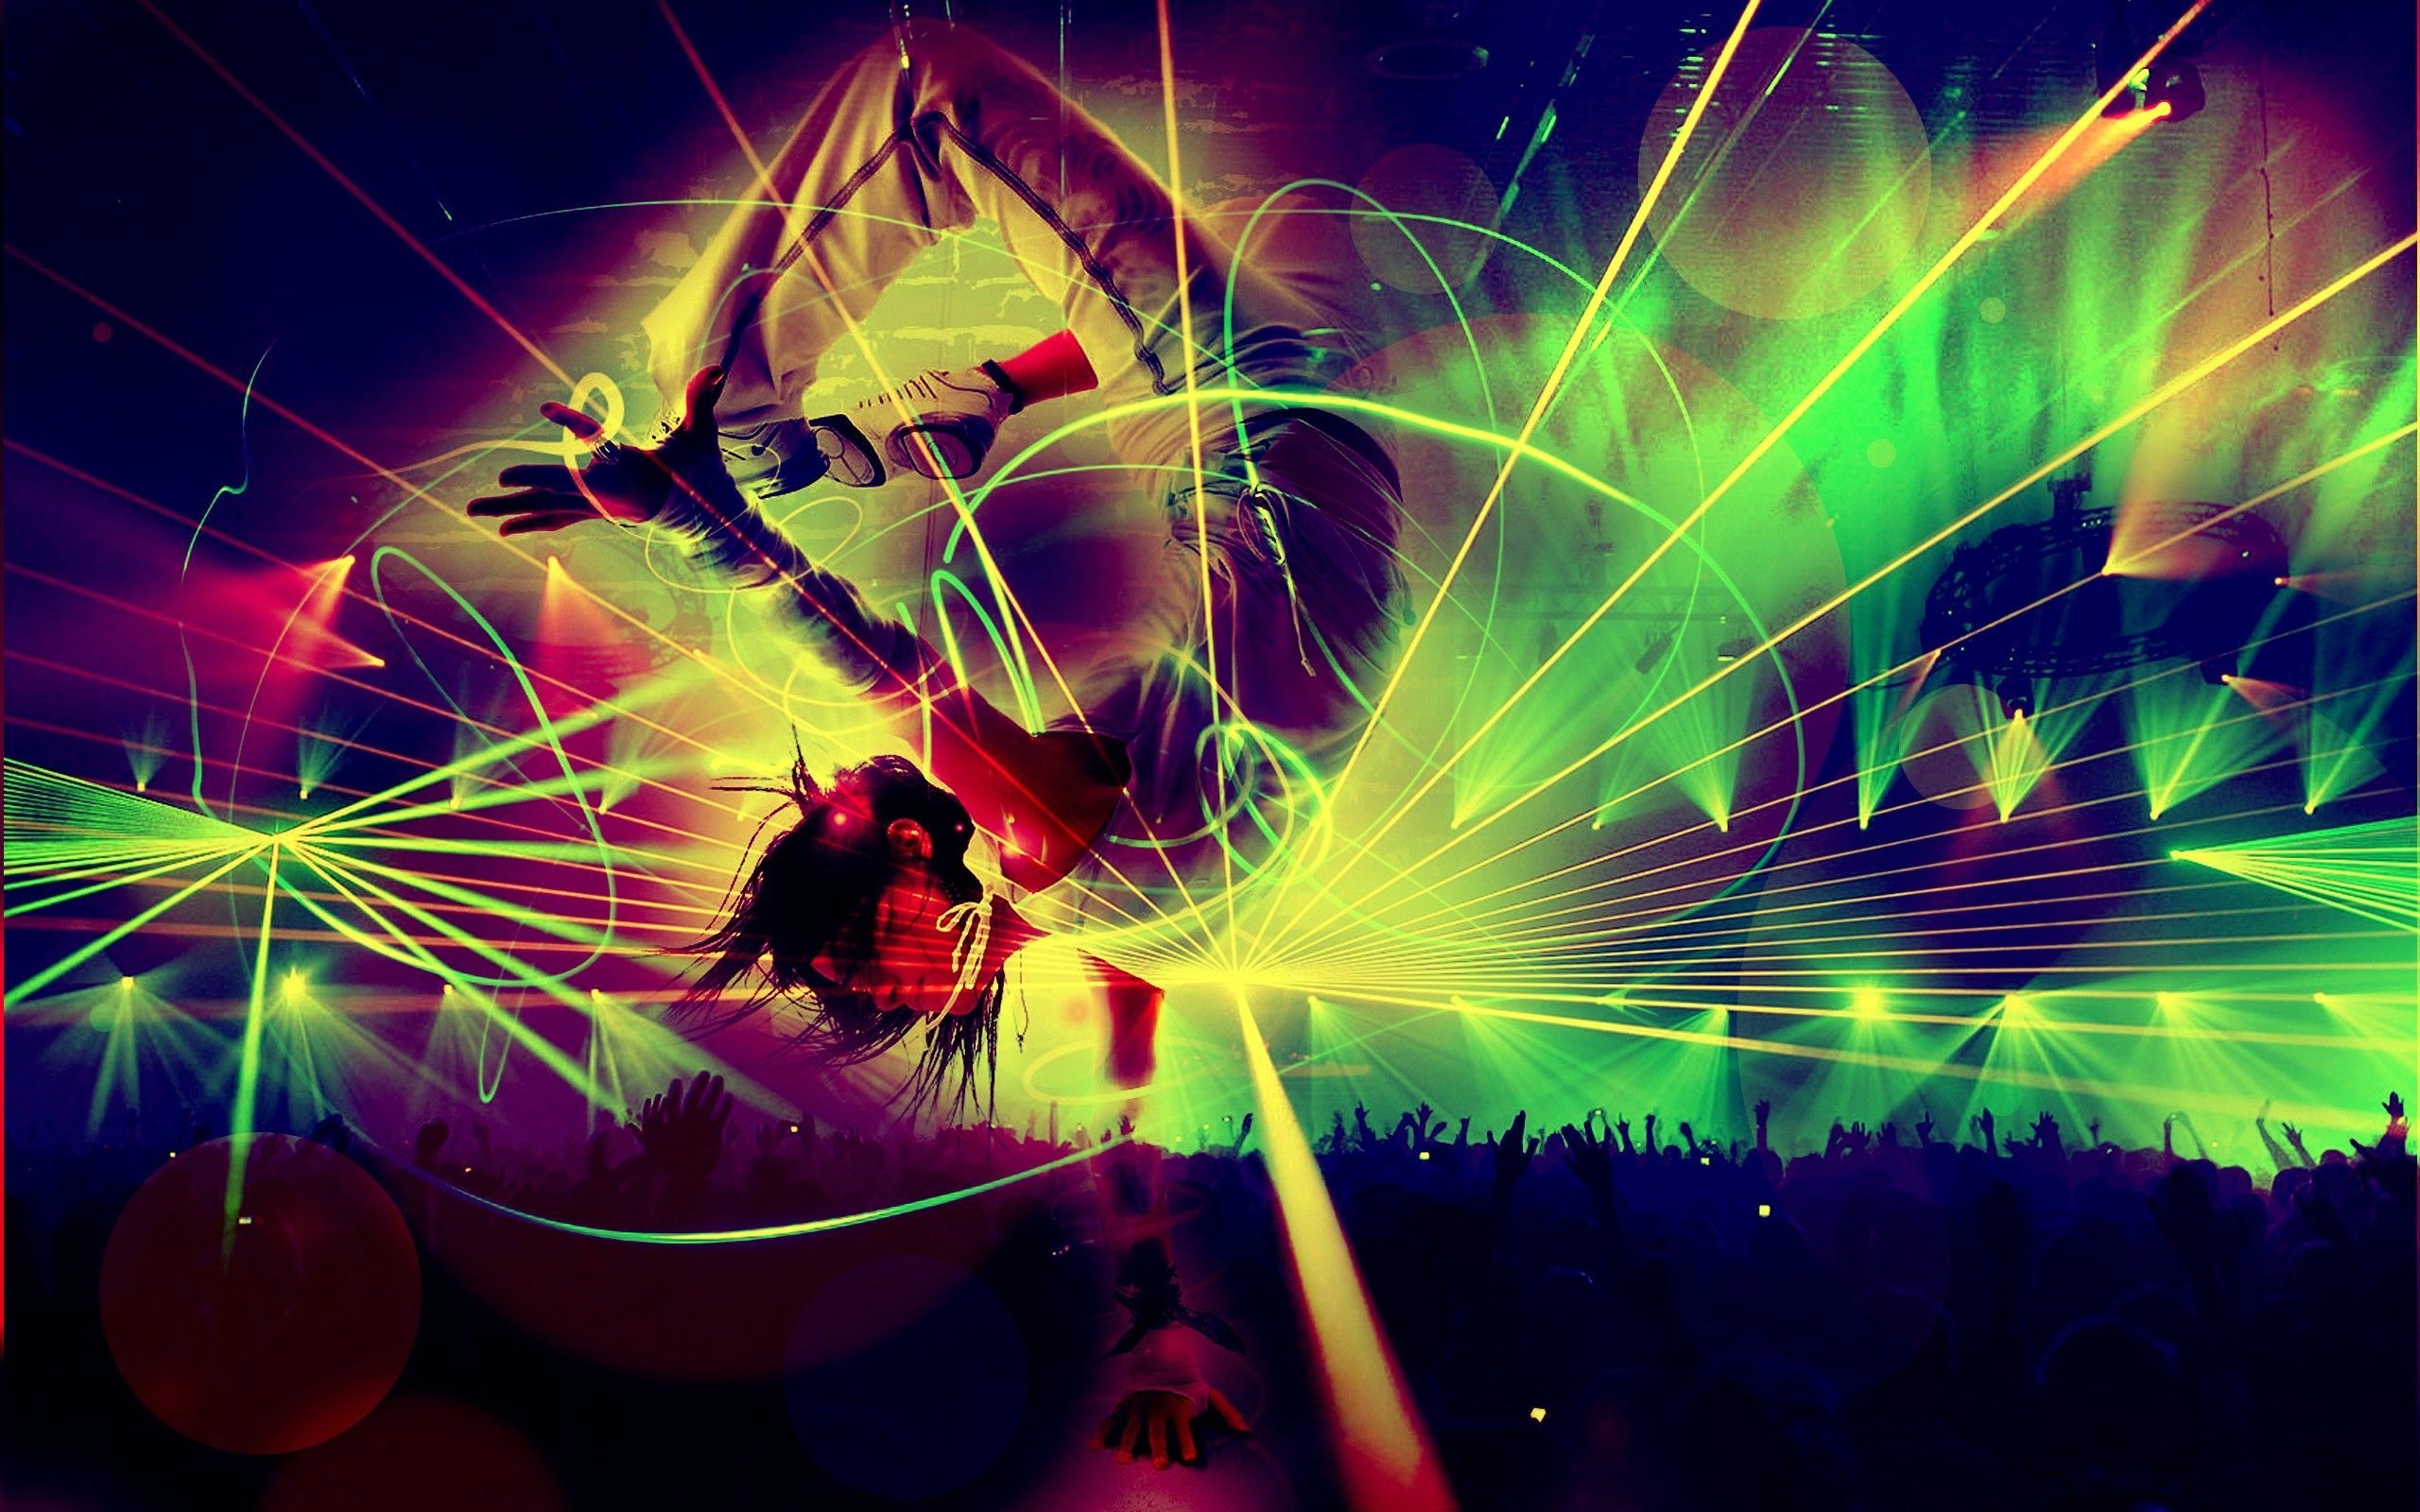 Party Dance Psychedelic Rave 2560x1600 HD Wallpaper in TurnLOL HD. Wallpaper, Dance workshop, Wallpaper gallery